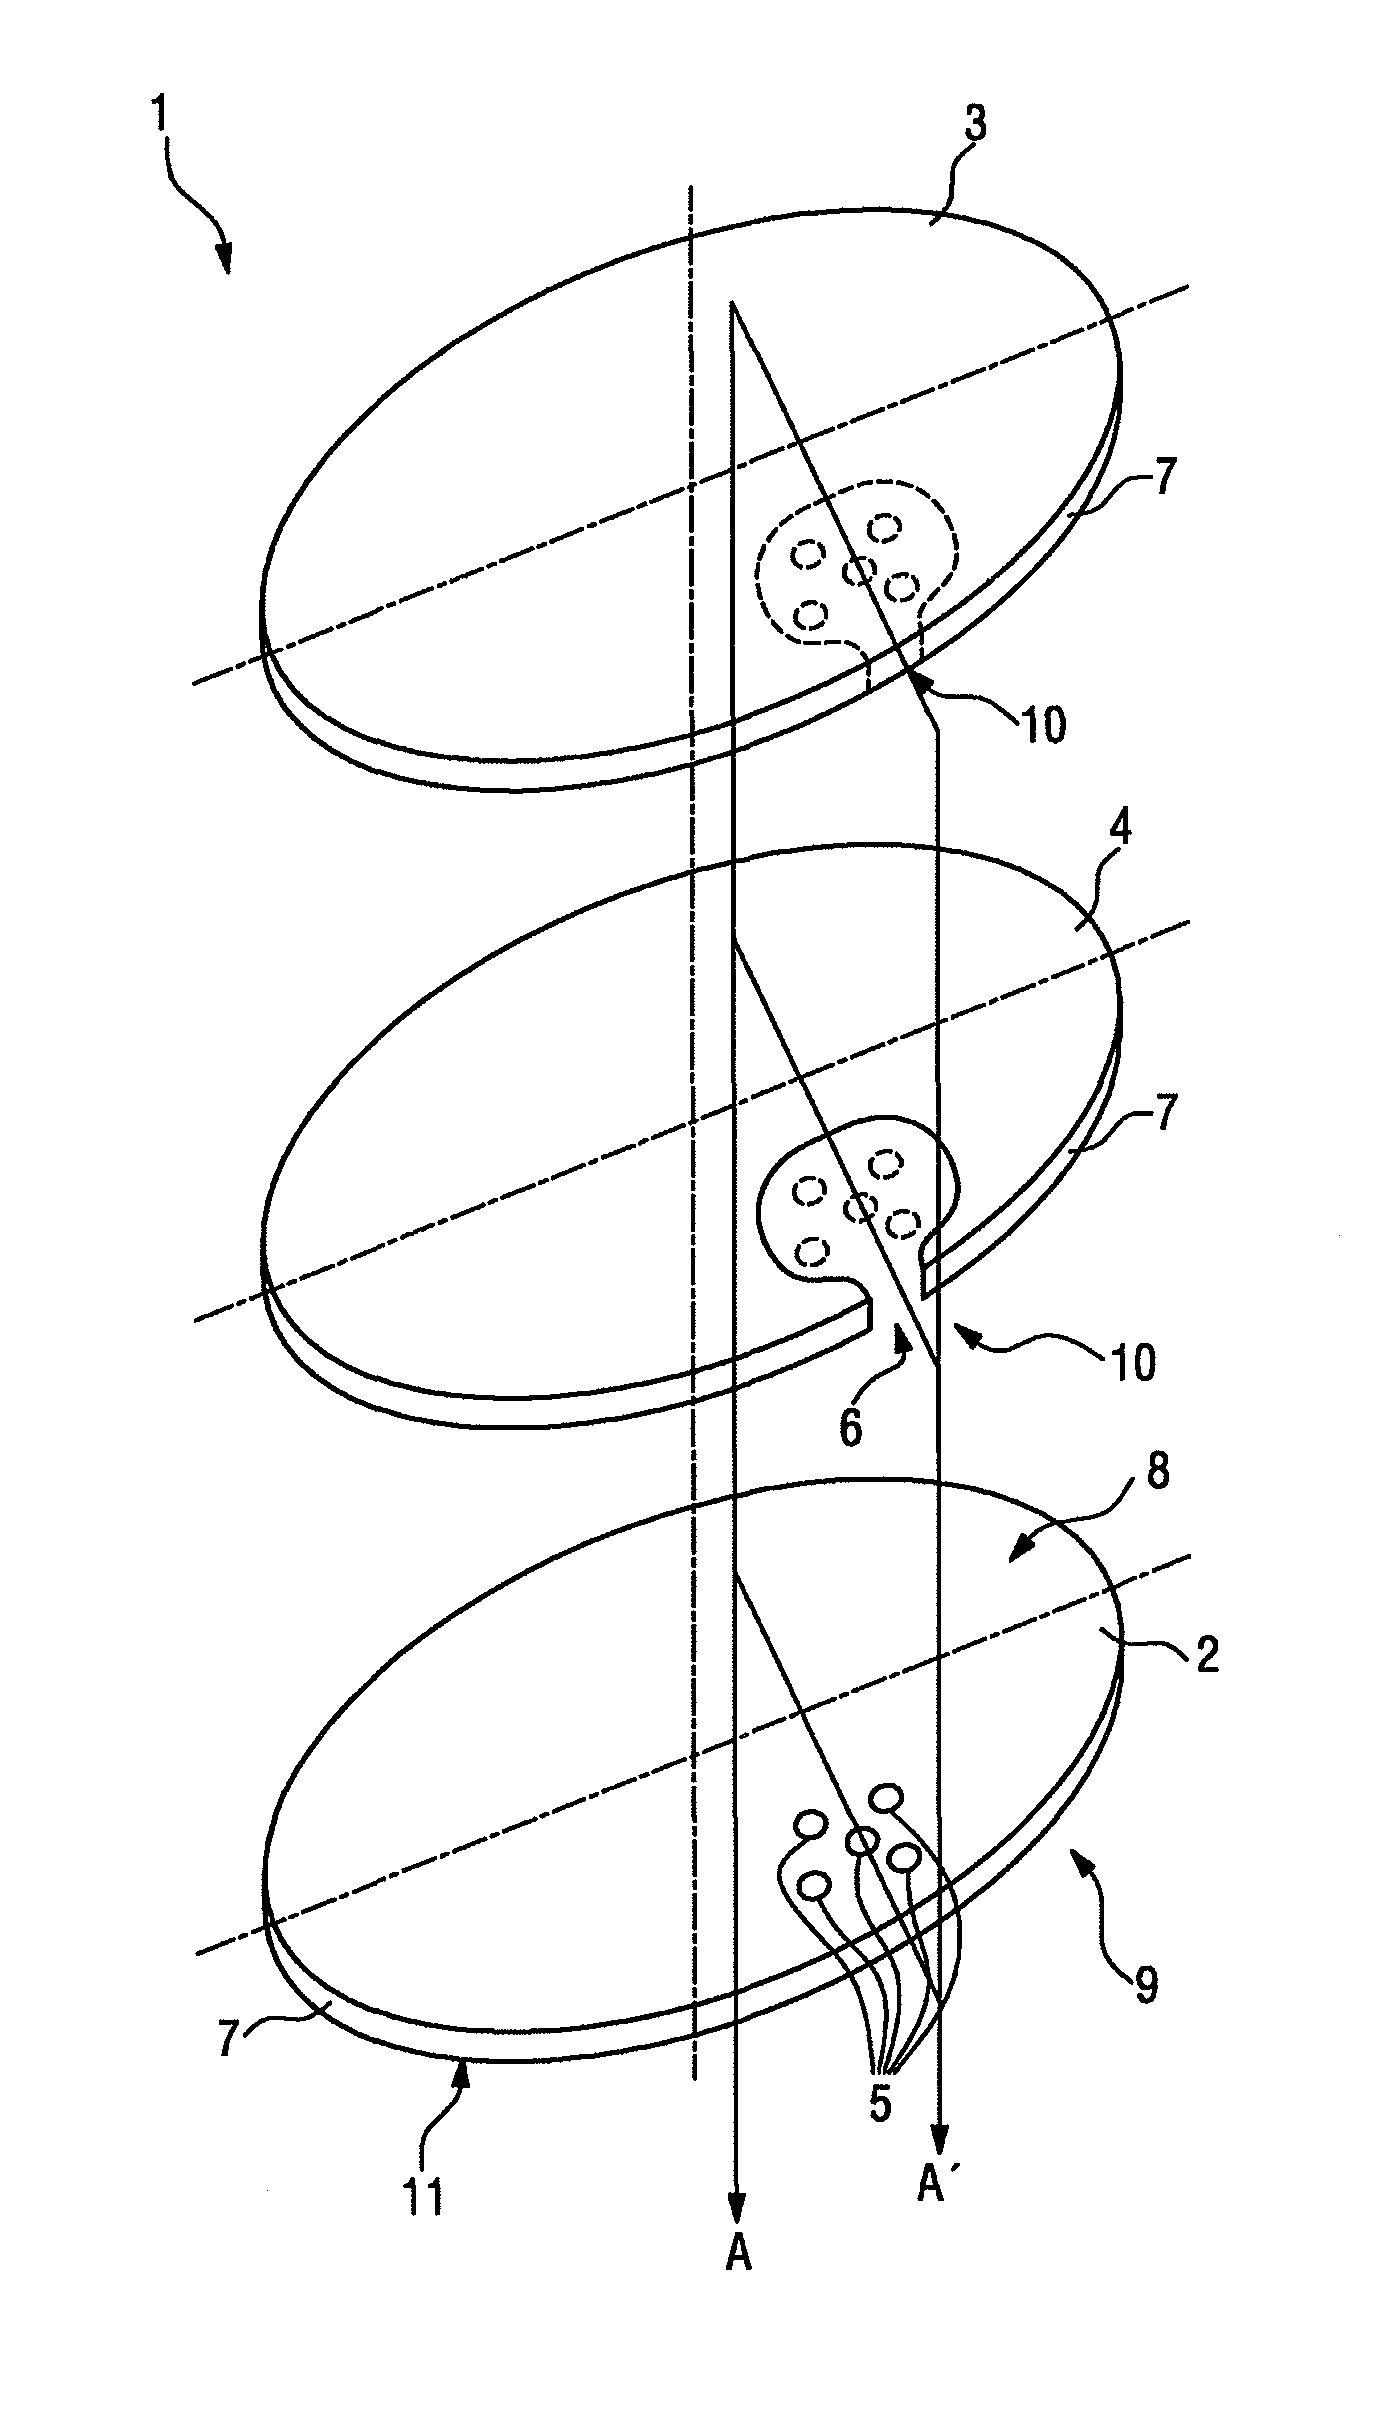 Foil for providing a peel-seal valve, package comprising the foil, and method of manufacturing the foil